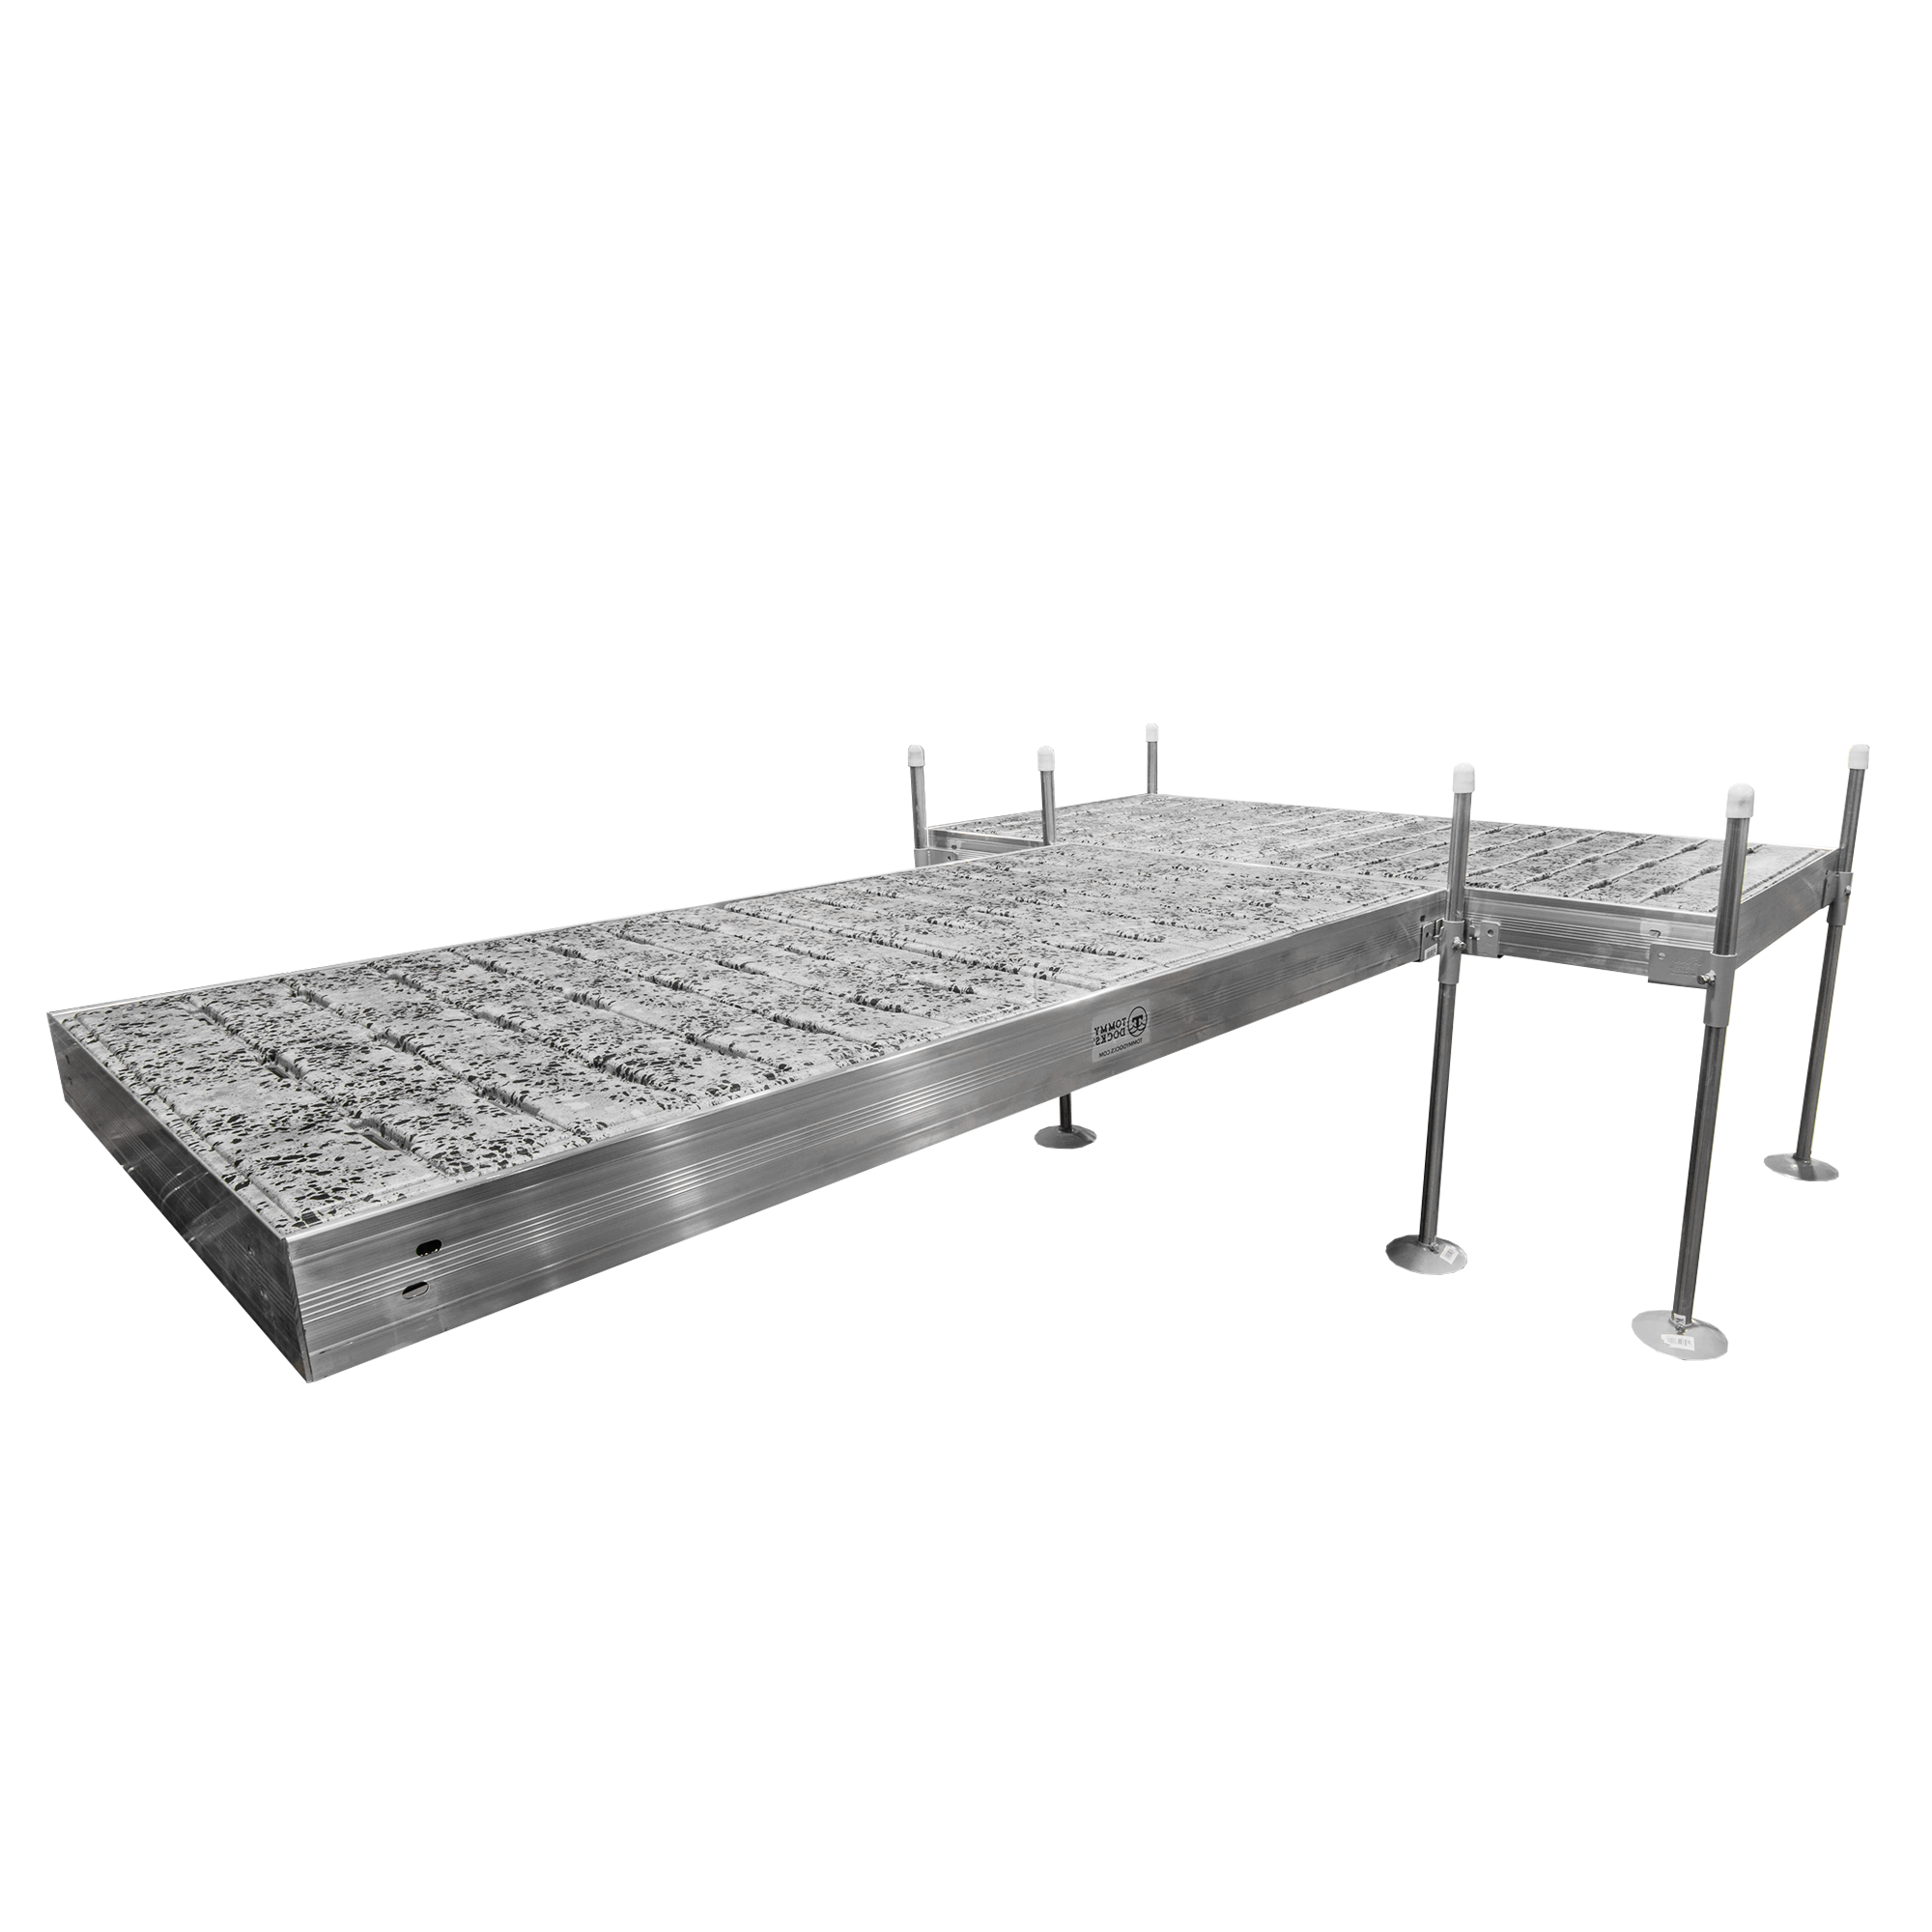 12' T-Shaped Boat Dock System with Aluminum Frame and Thermoformed Terrazzo Decking